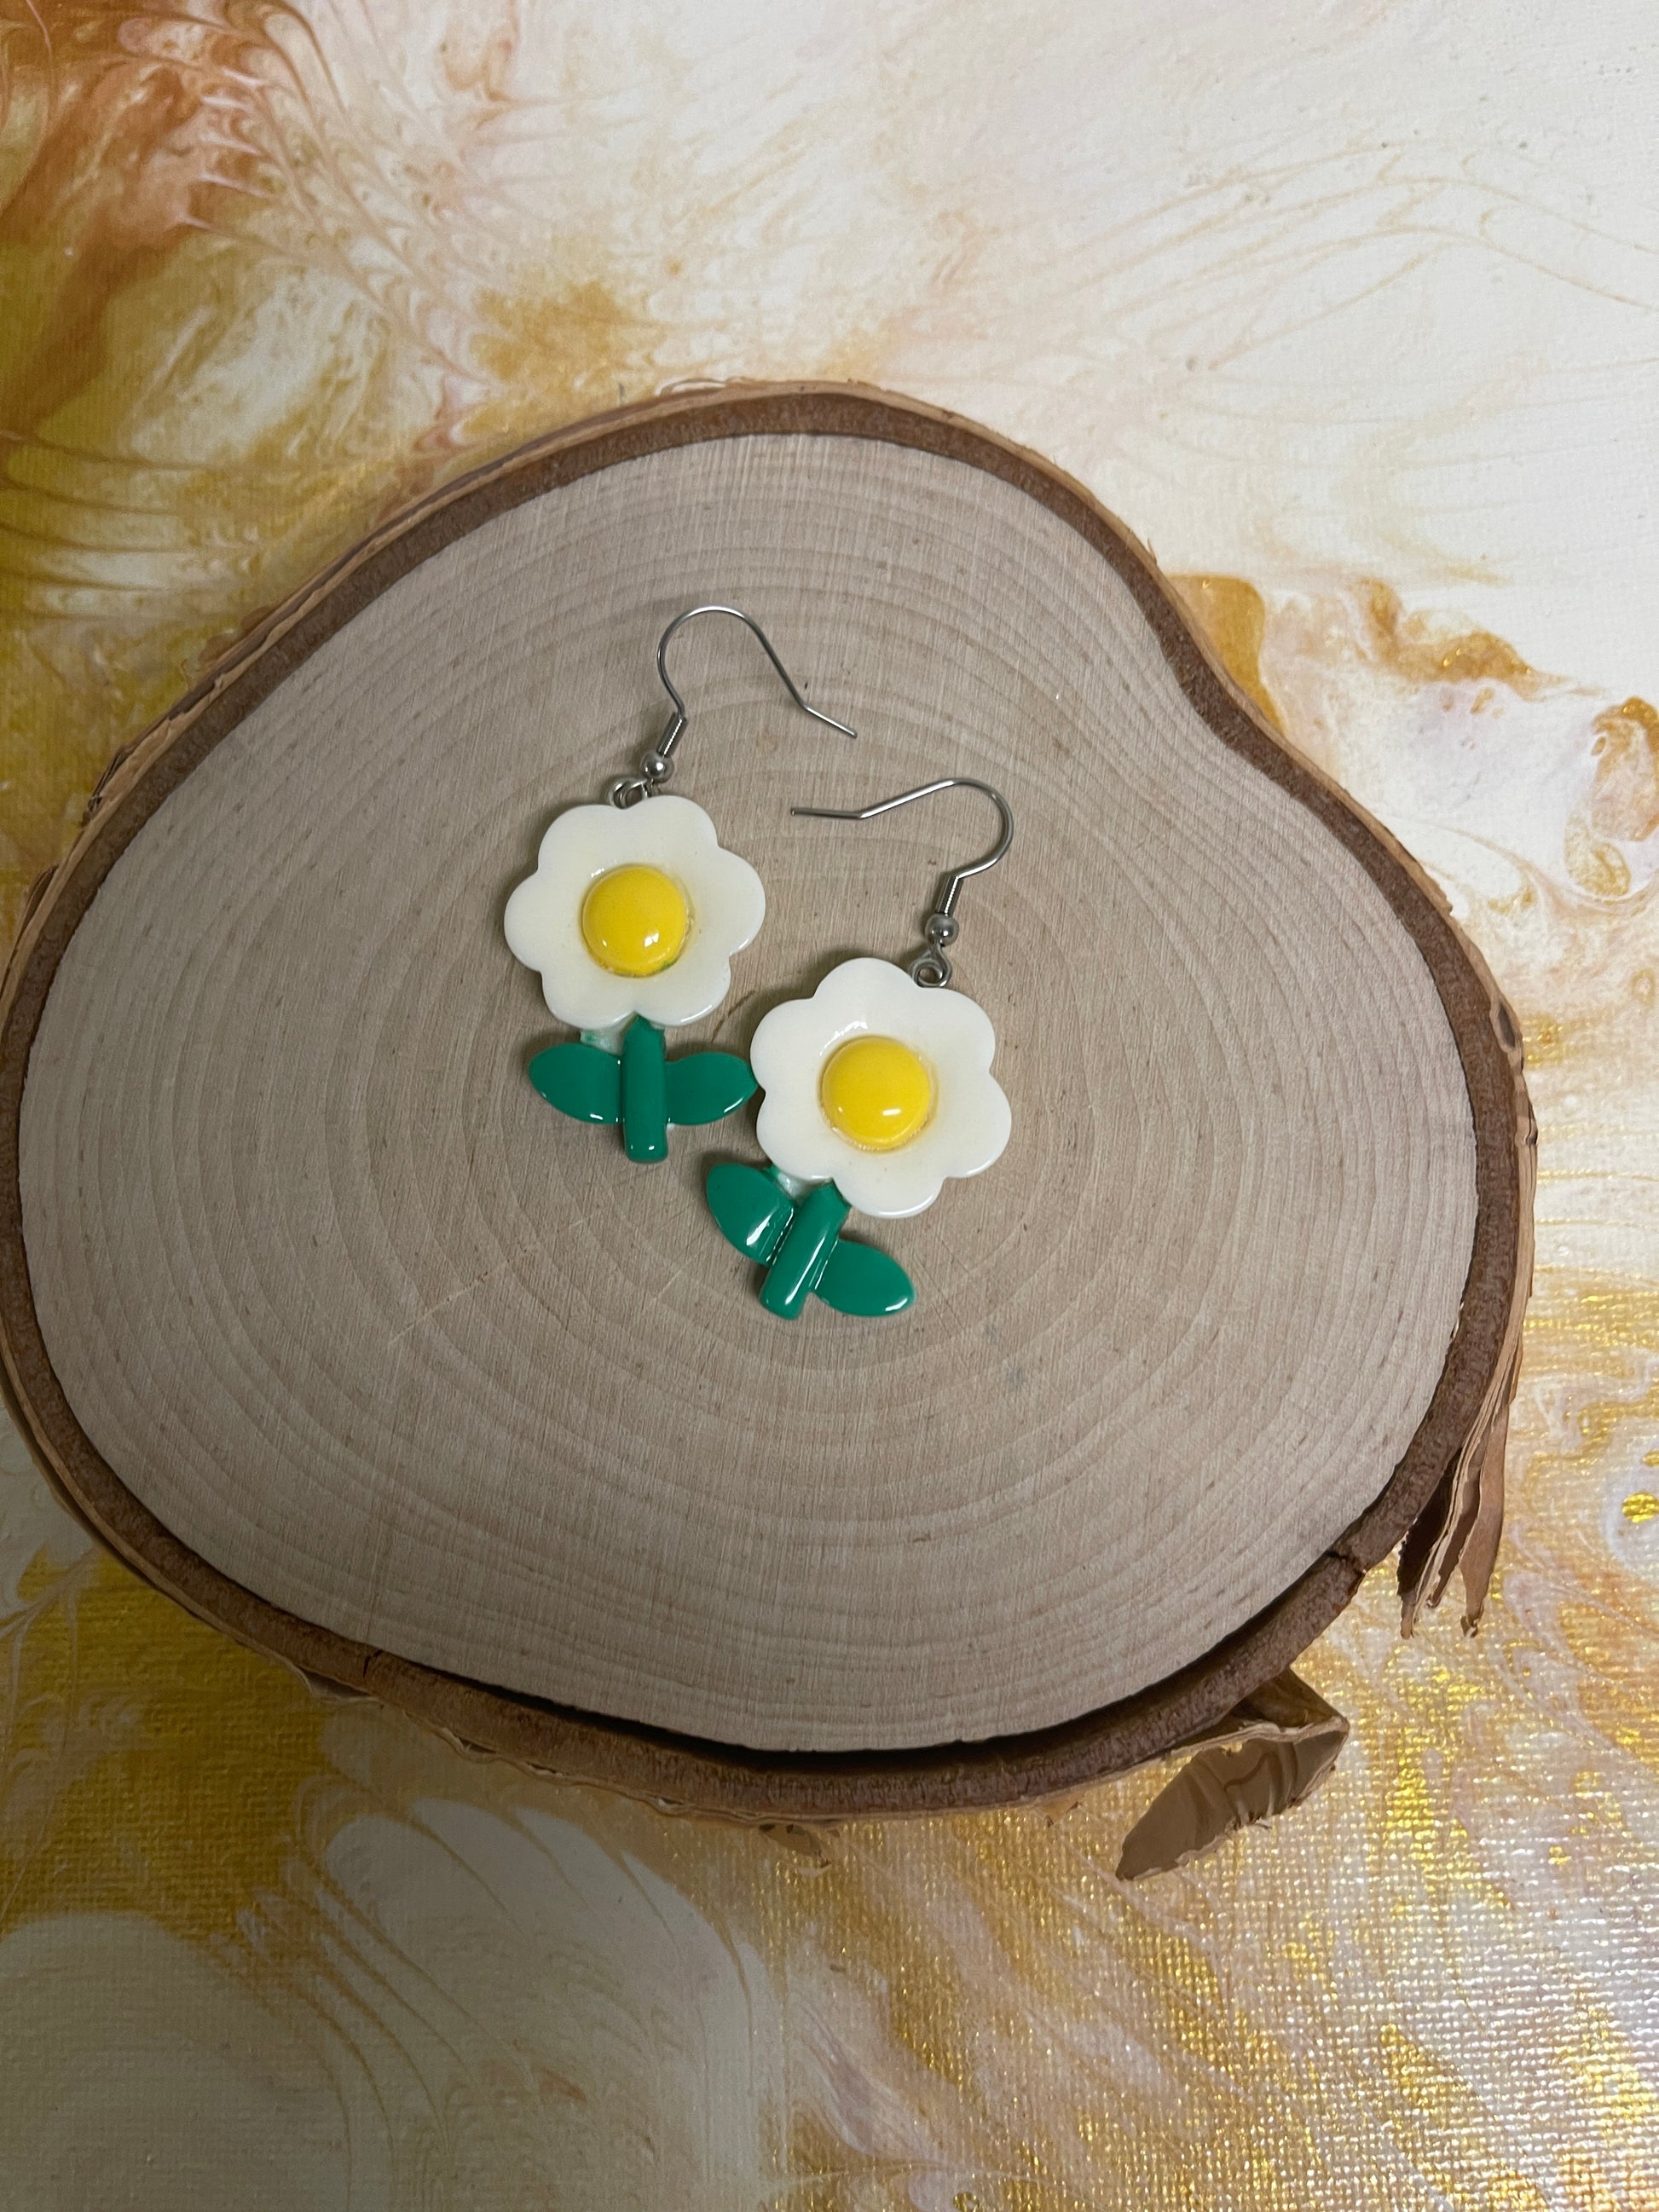 Daisy Wire Earrings; white petals, yellow center and green stemPink tiful of LOVE